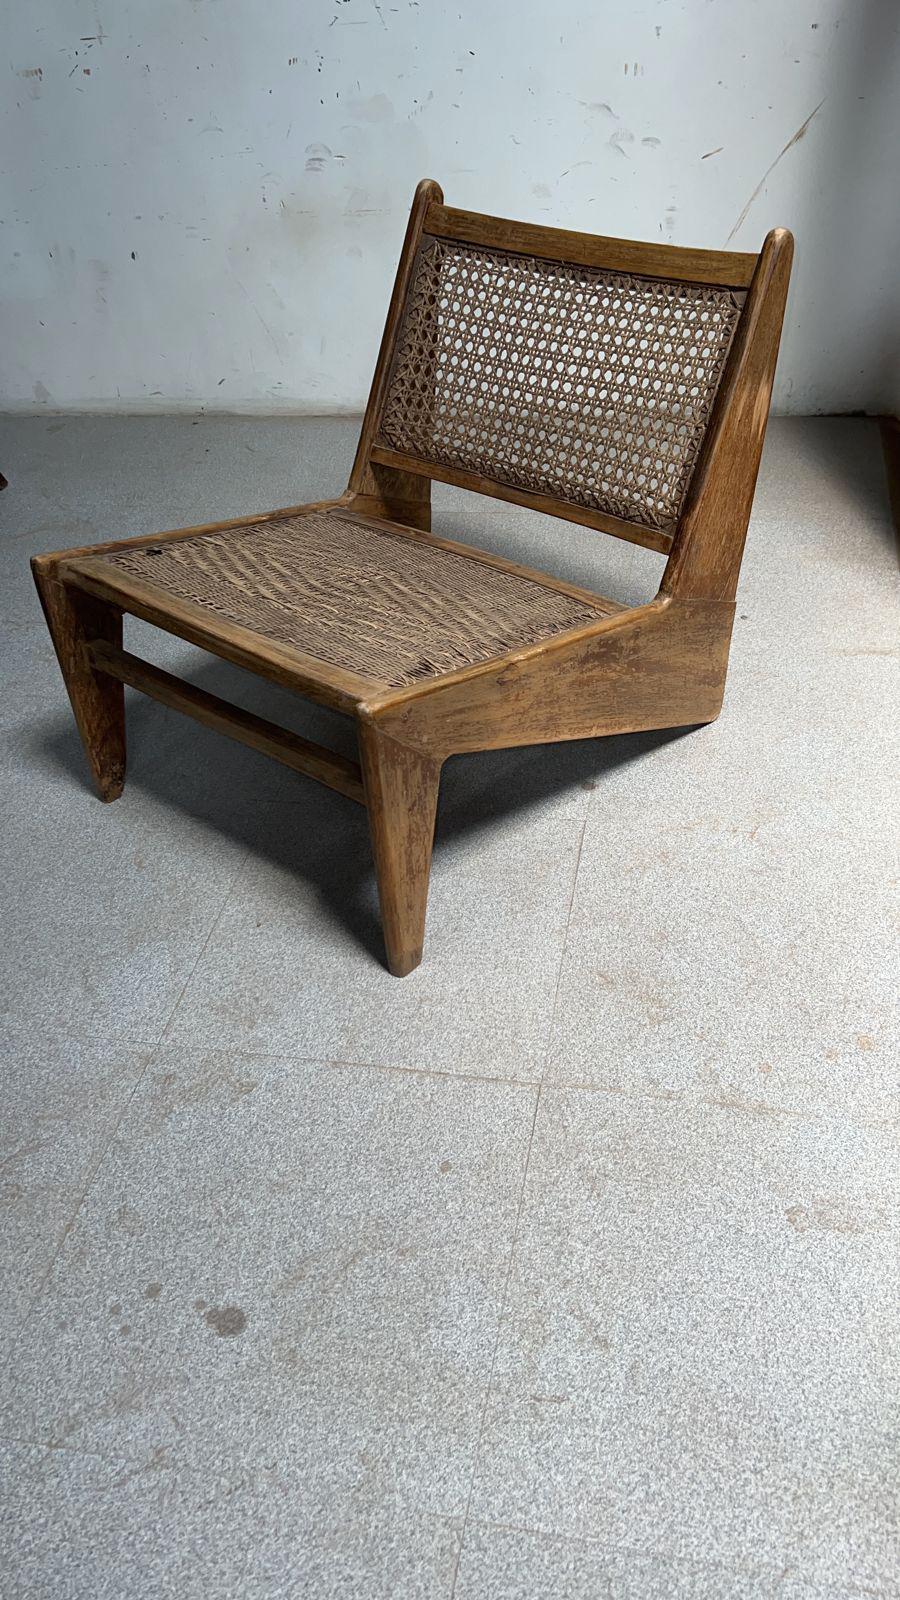 Indian Pair of Pierre Jeanneret Model PJ010704 Kangourou Chairs Chandigarh 1970